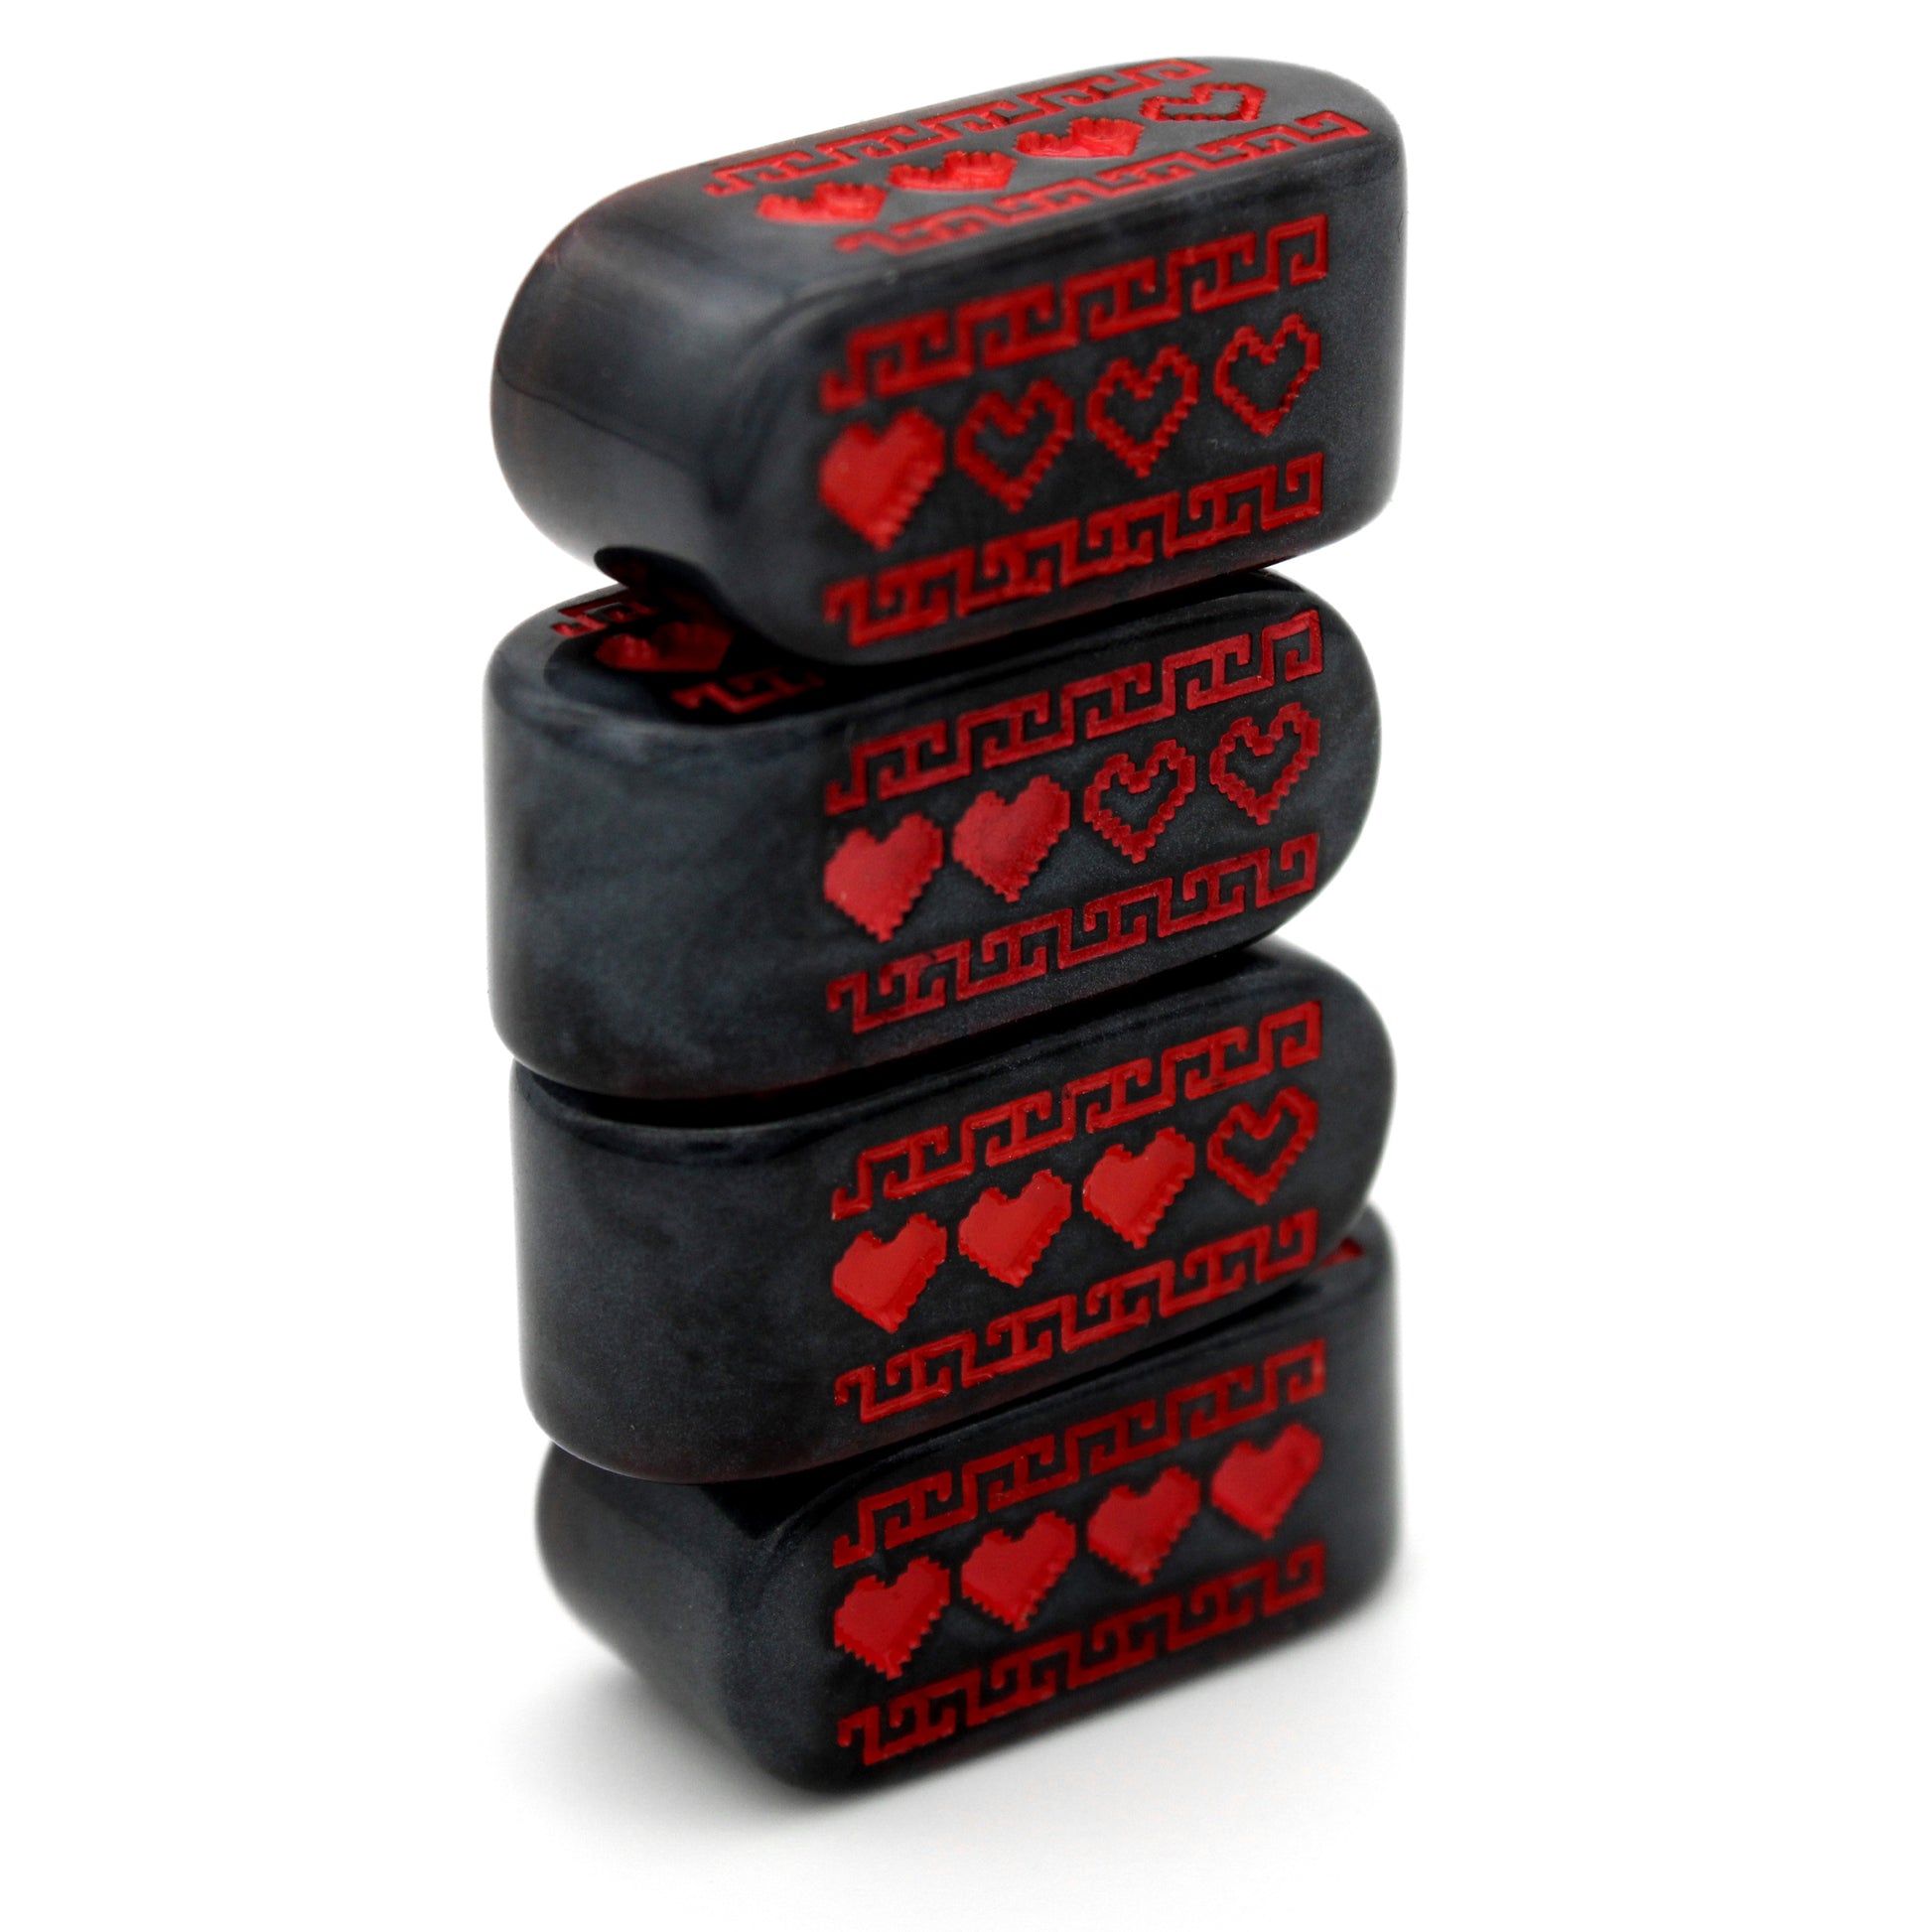 Pixel Hearts: Original Console are custom black resin Infinity d4s inked in bright red.